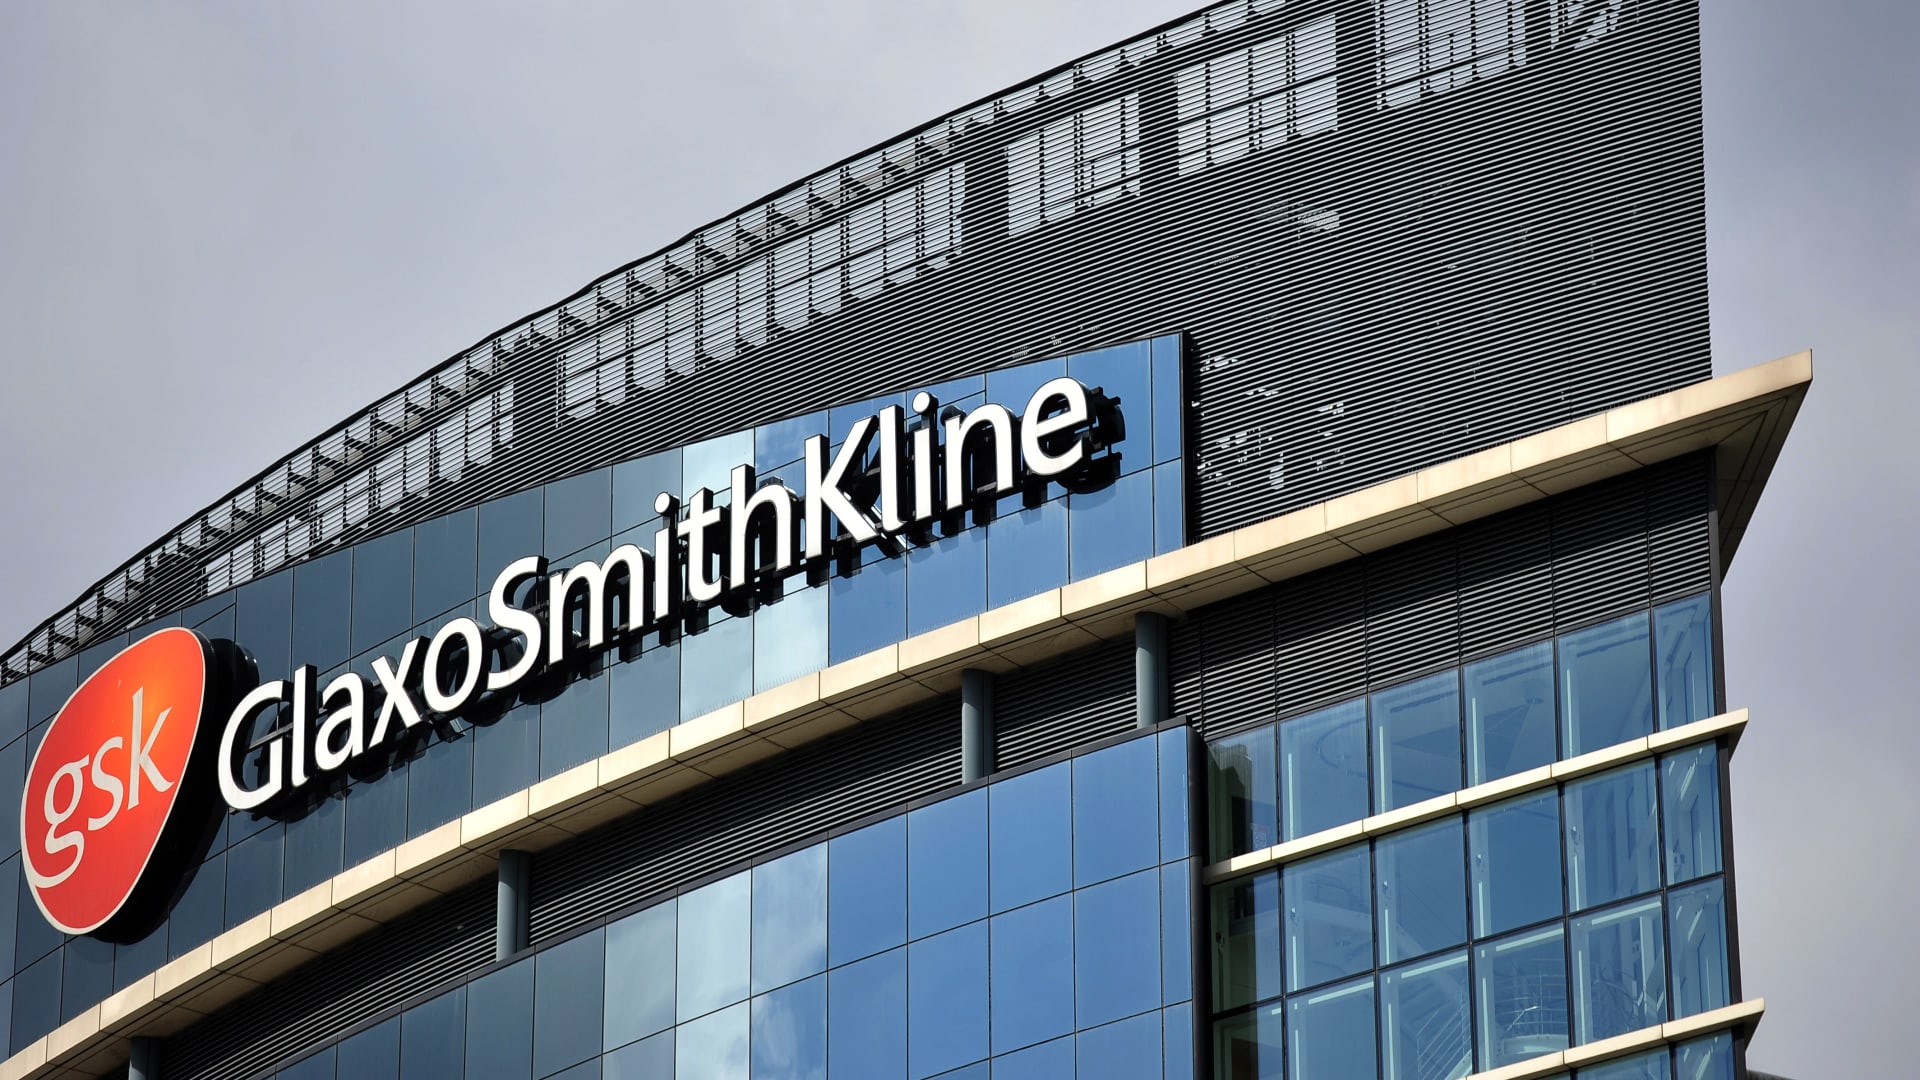 FDA approves GSK’s RSV vaccine for older adults, world’s first shot in opposition to virus